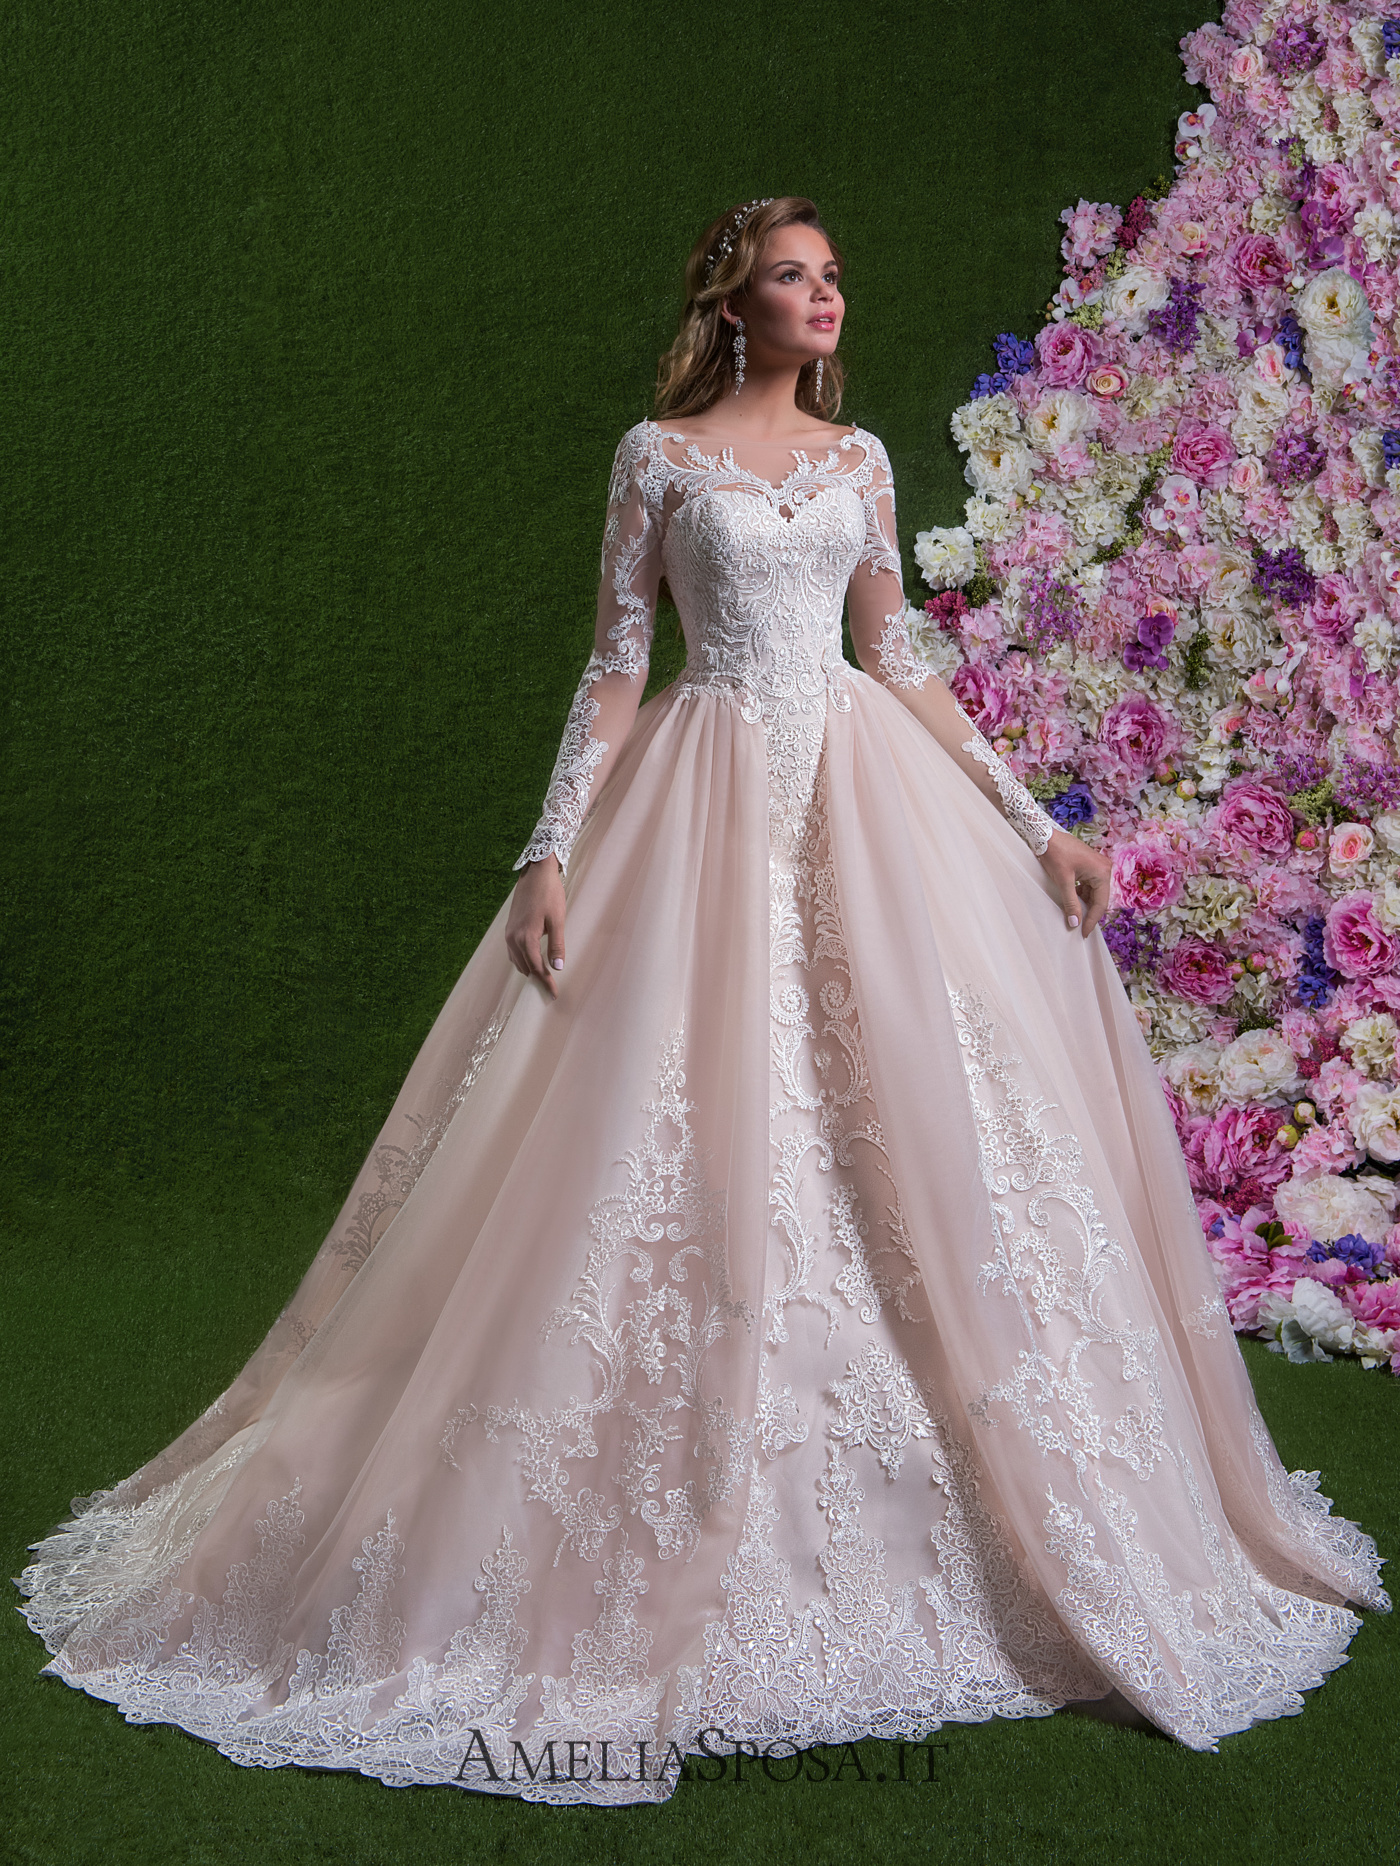 Gorgeous And Elegant Wedding Dress Collection By Amelia Sposa